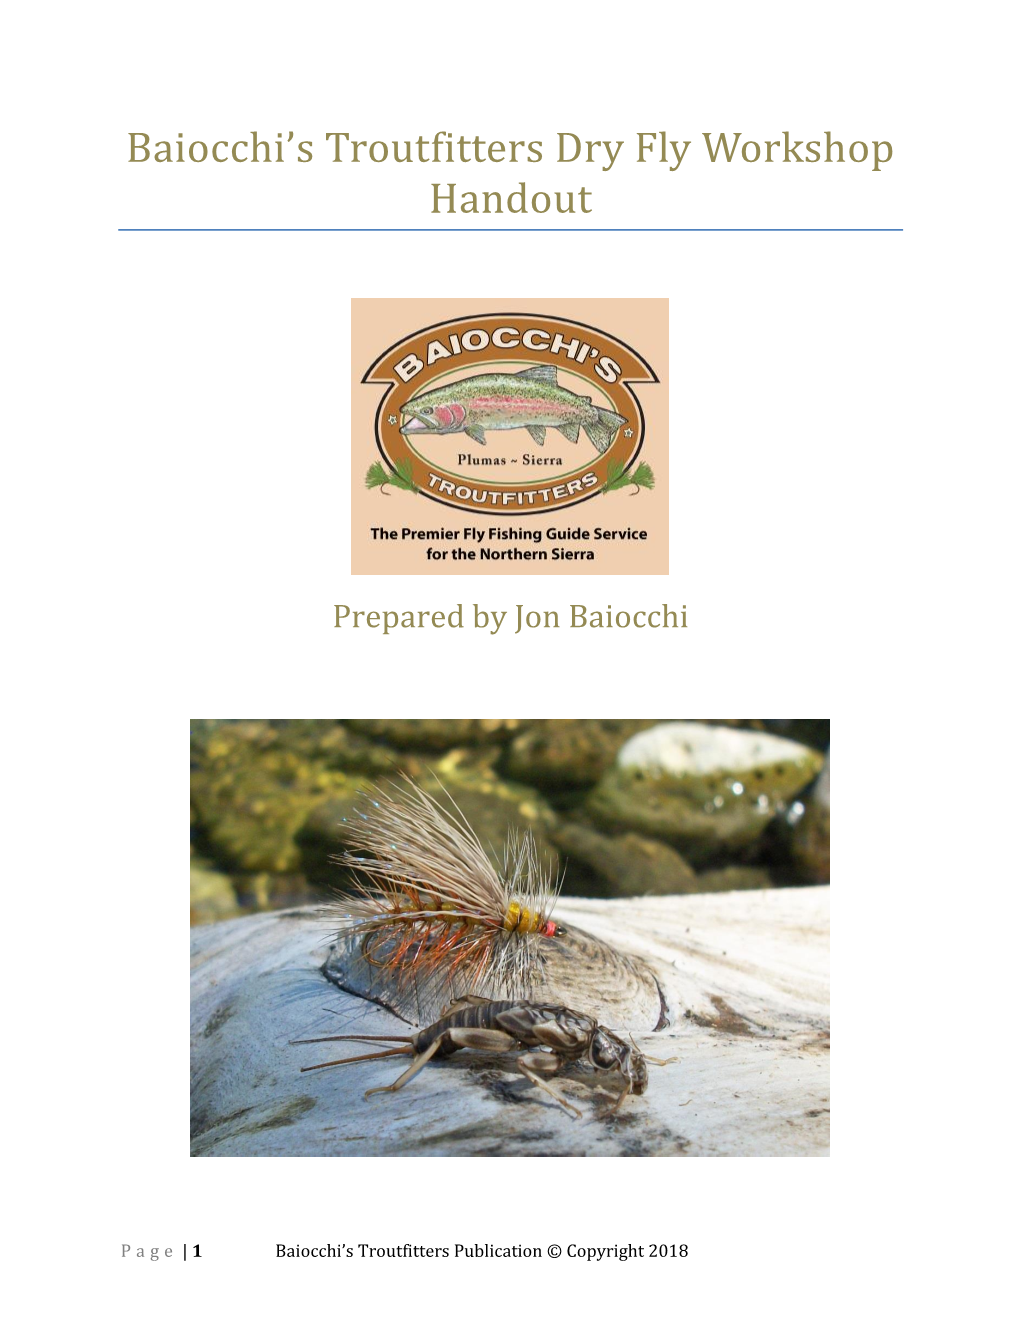 Baiocchi's Troutfitters Dry Fly Workshop Handout